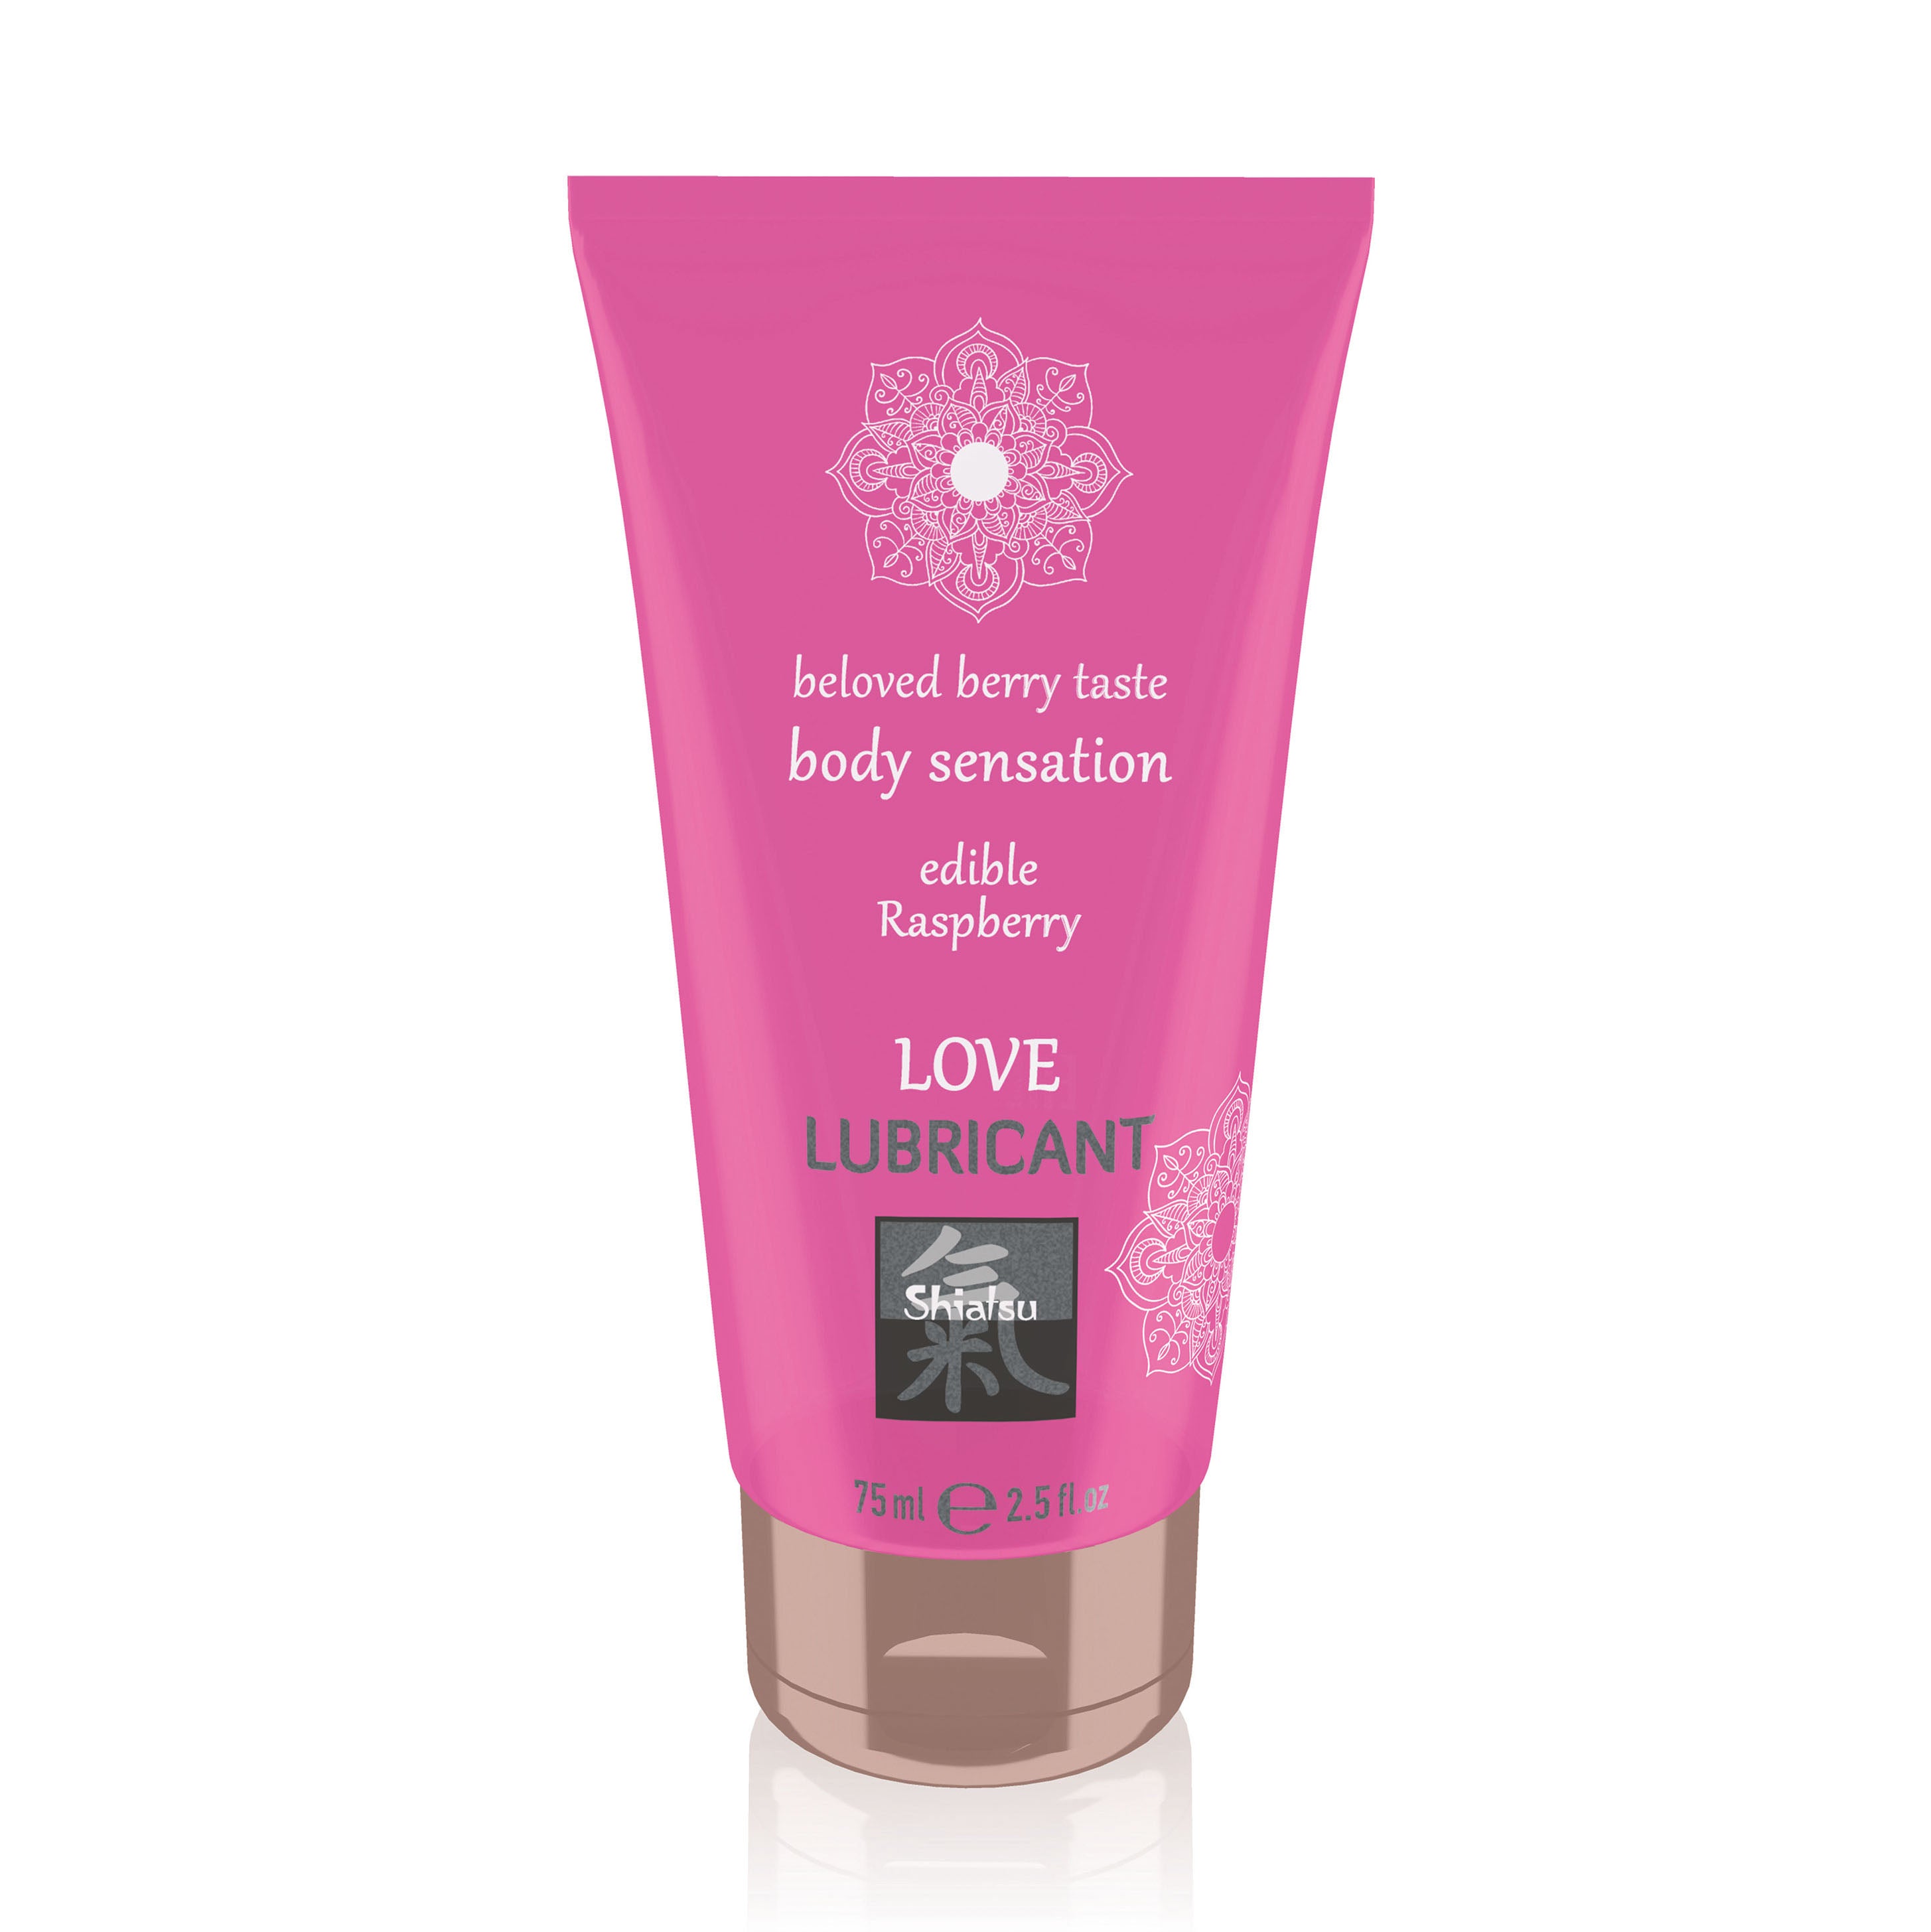 Shiatsu Love Lubricant Edible Raspberry 75ml > Relaxation Zone > Flavoured Lubricants and Oils 75ml, Both, Flavoured Lubricants and Oils, NEWLY-IMPORTED - So Luxe Lingerie